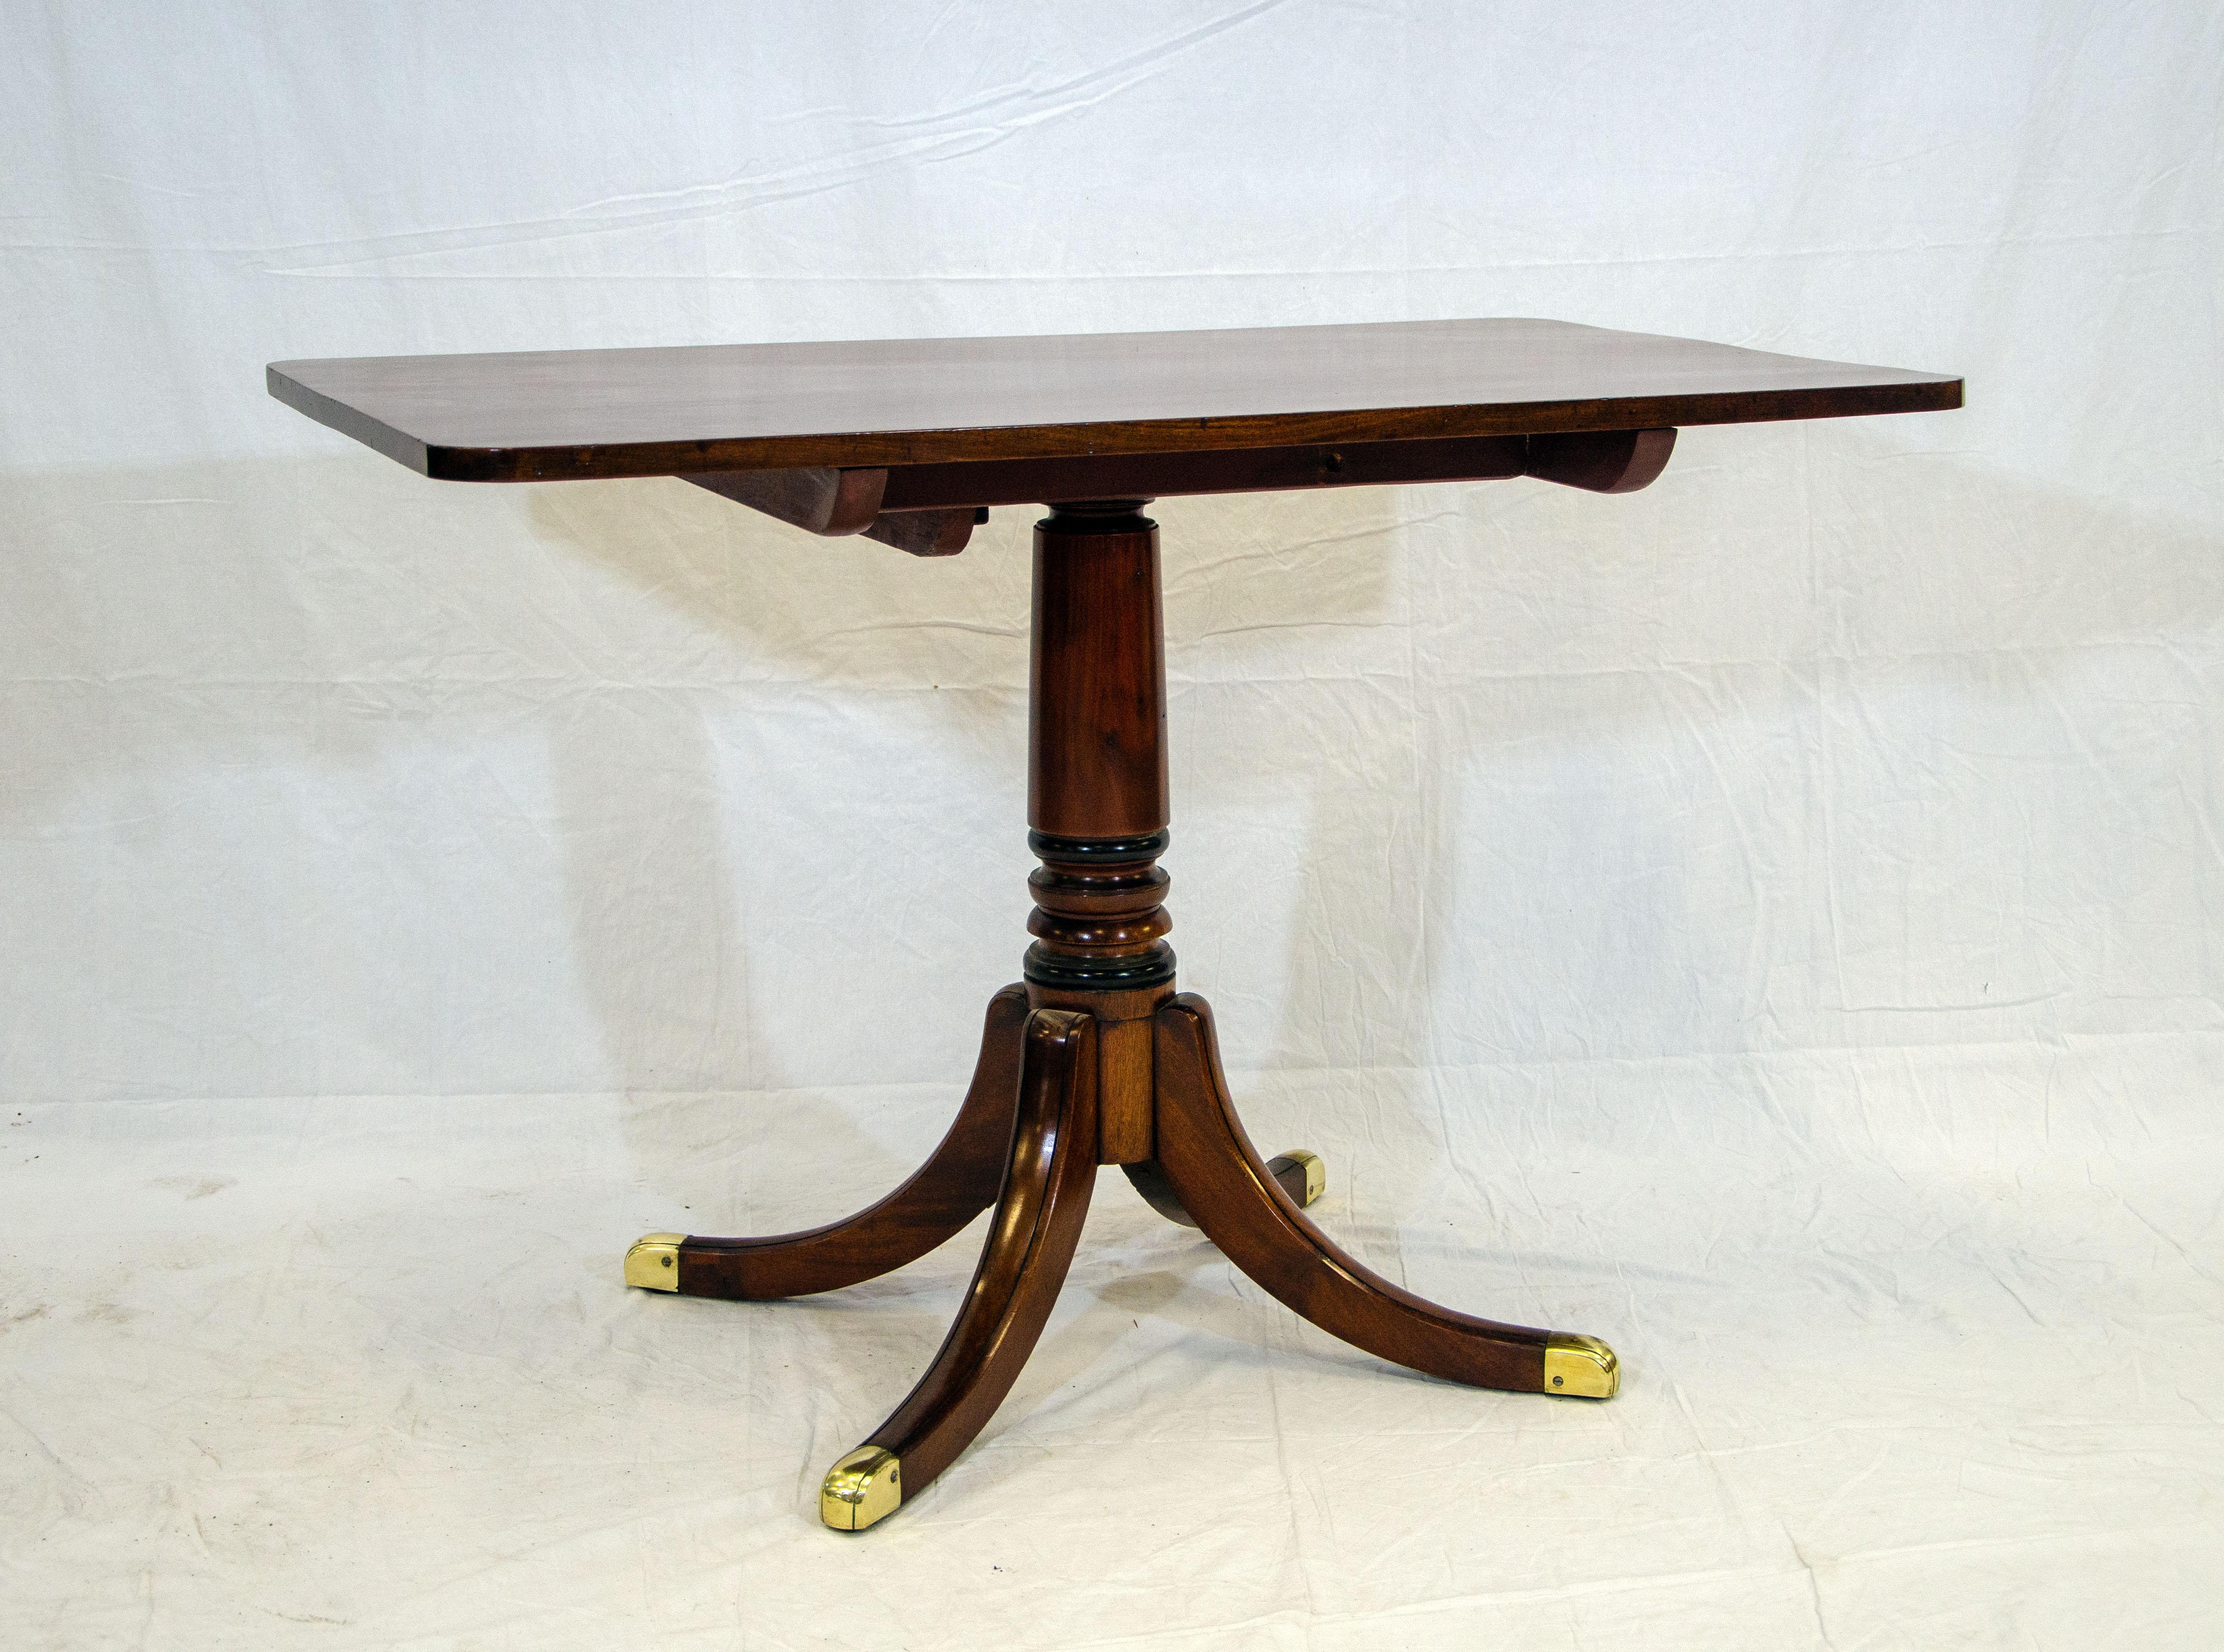 Duncan Phyfe style mahogany tilt-top table with a very nice original finish. The center pedestal has a turned section above the four legs with brass caps. There are latches on the underside to tilt the top for storage. The center pedestal has about